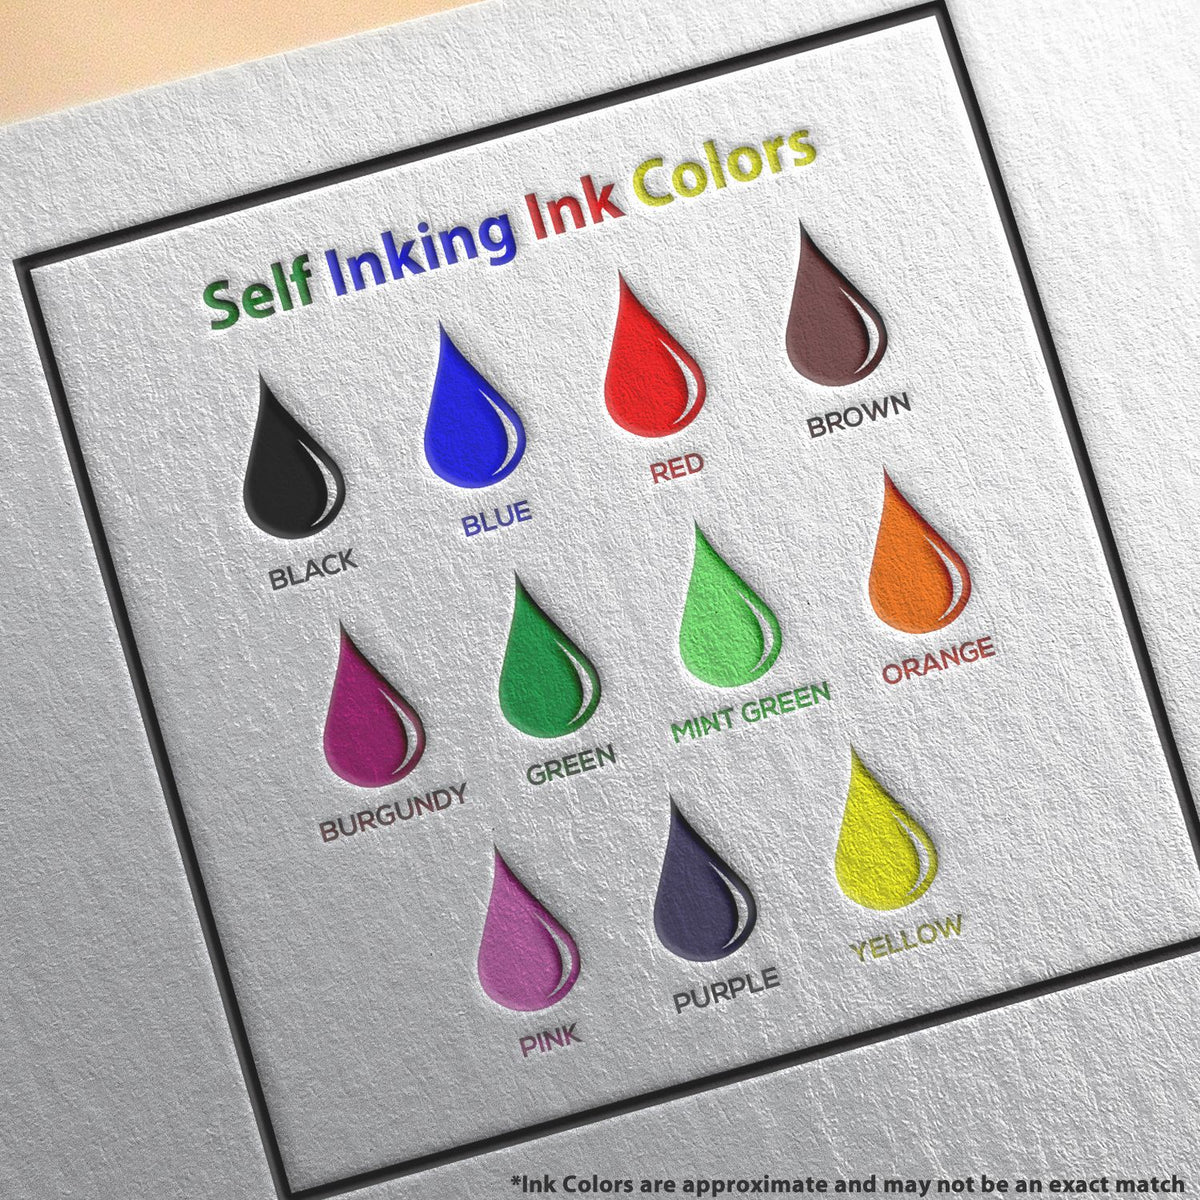 A picture showing the different ink colors or hues available for the Self-Inking Rectangular South Dakota Notary Stamp product.